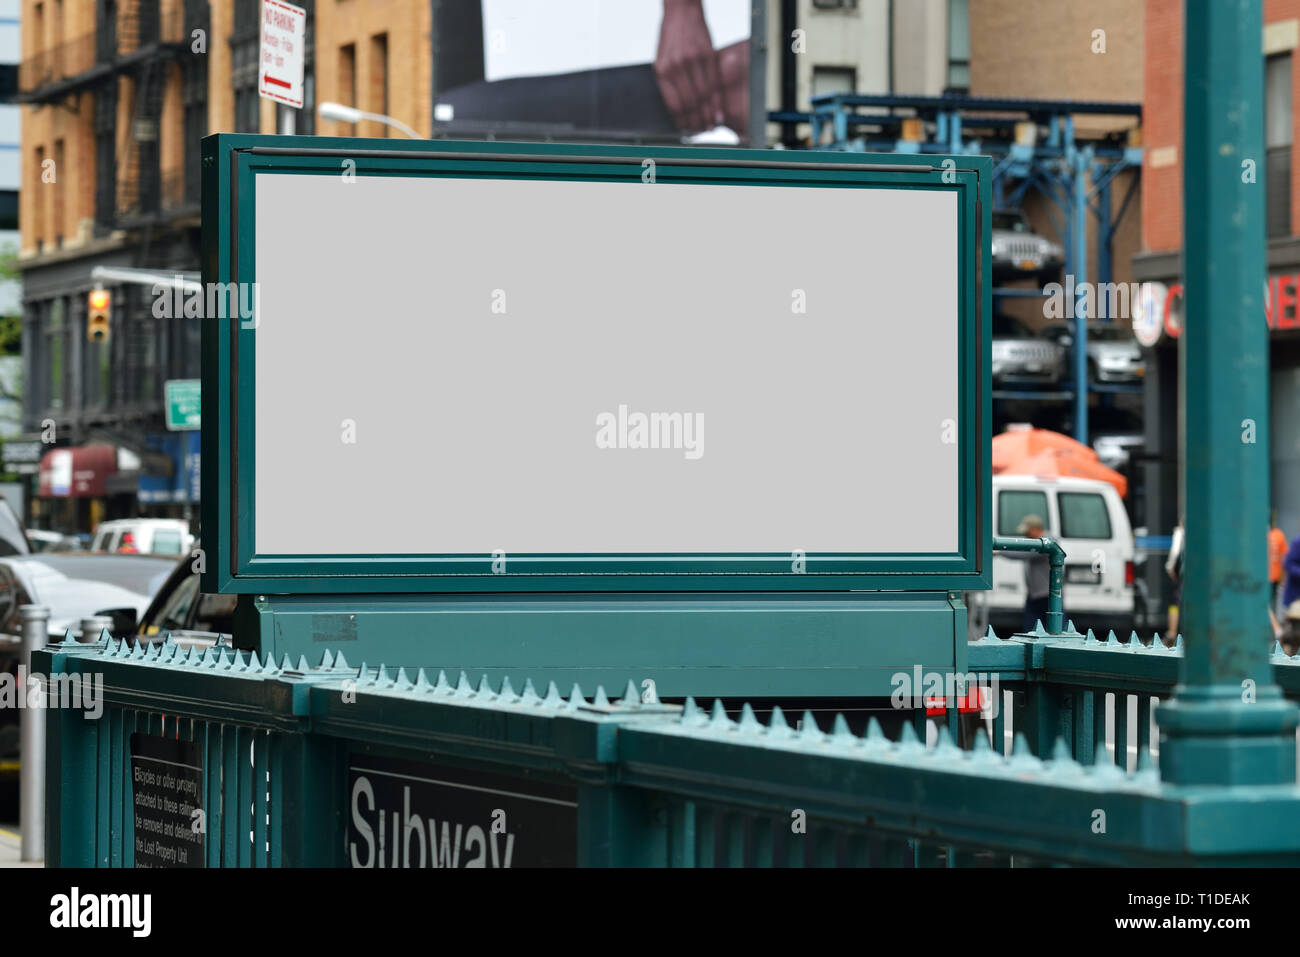 Subway entrance billboard. Clipping path included Stock Photo